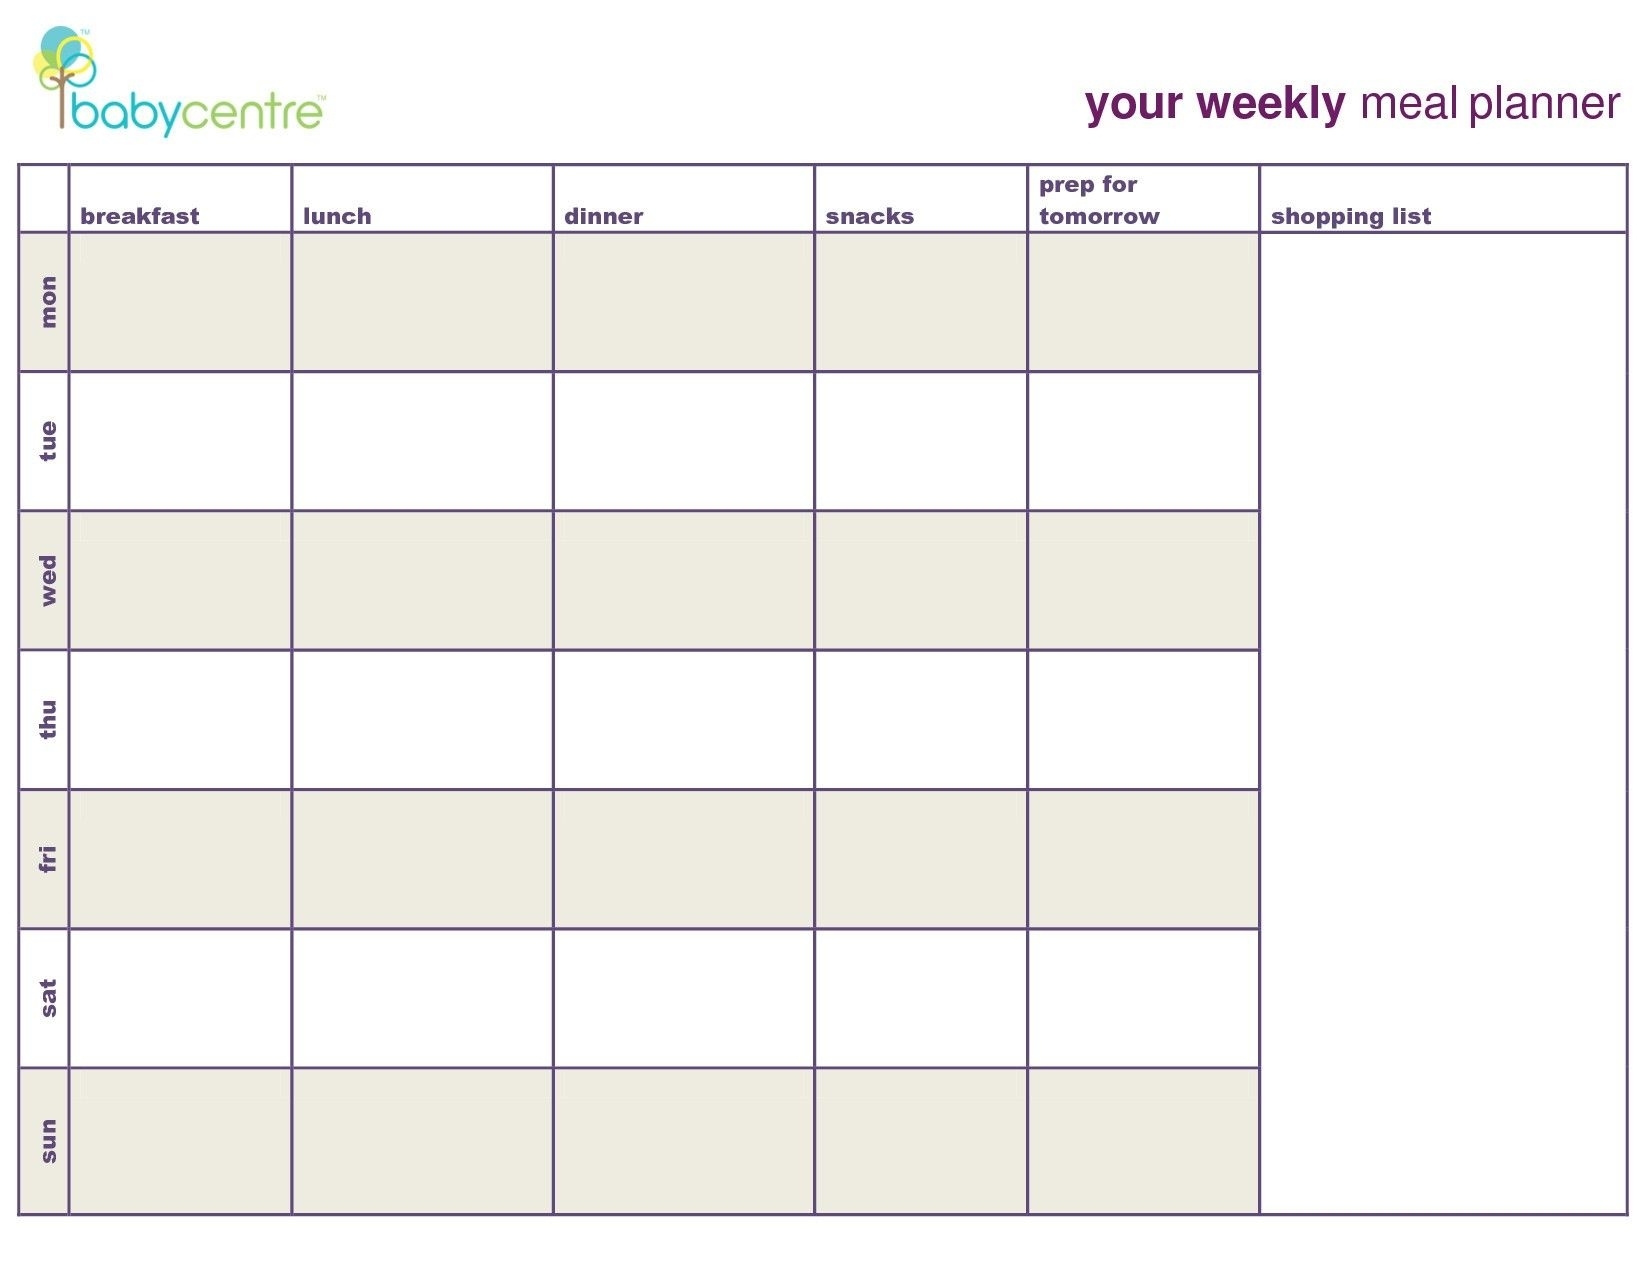 7 Day Menu Planner Template Awesome Meal Planning Calendar Template intended for 7 Day Meal Planner Template